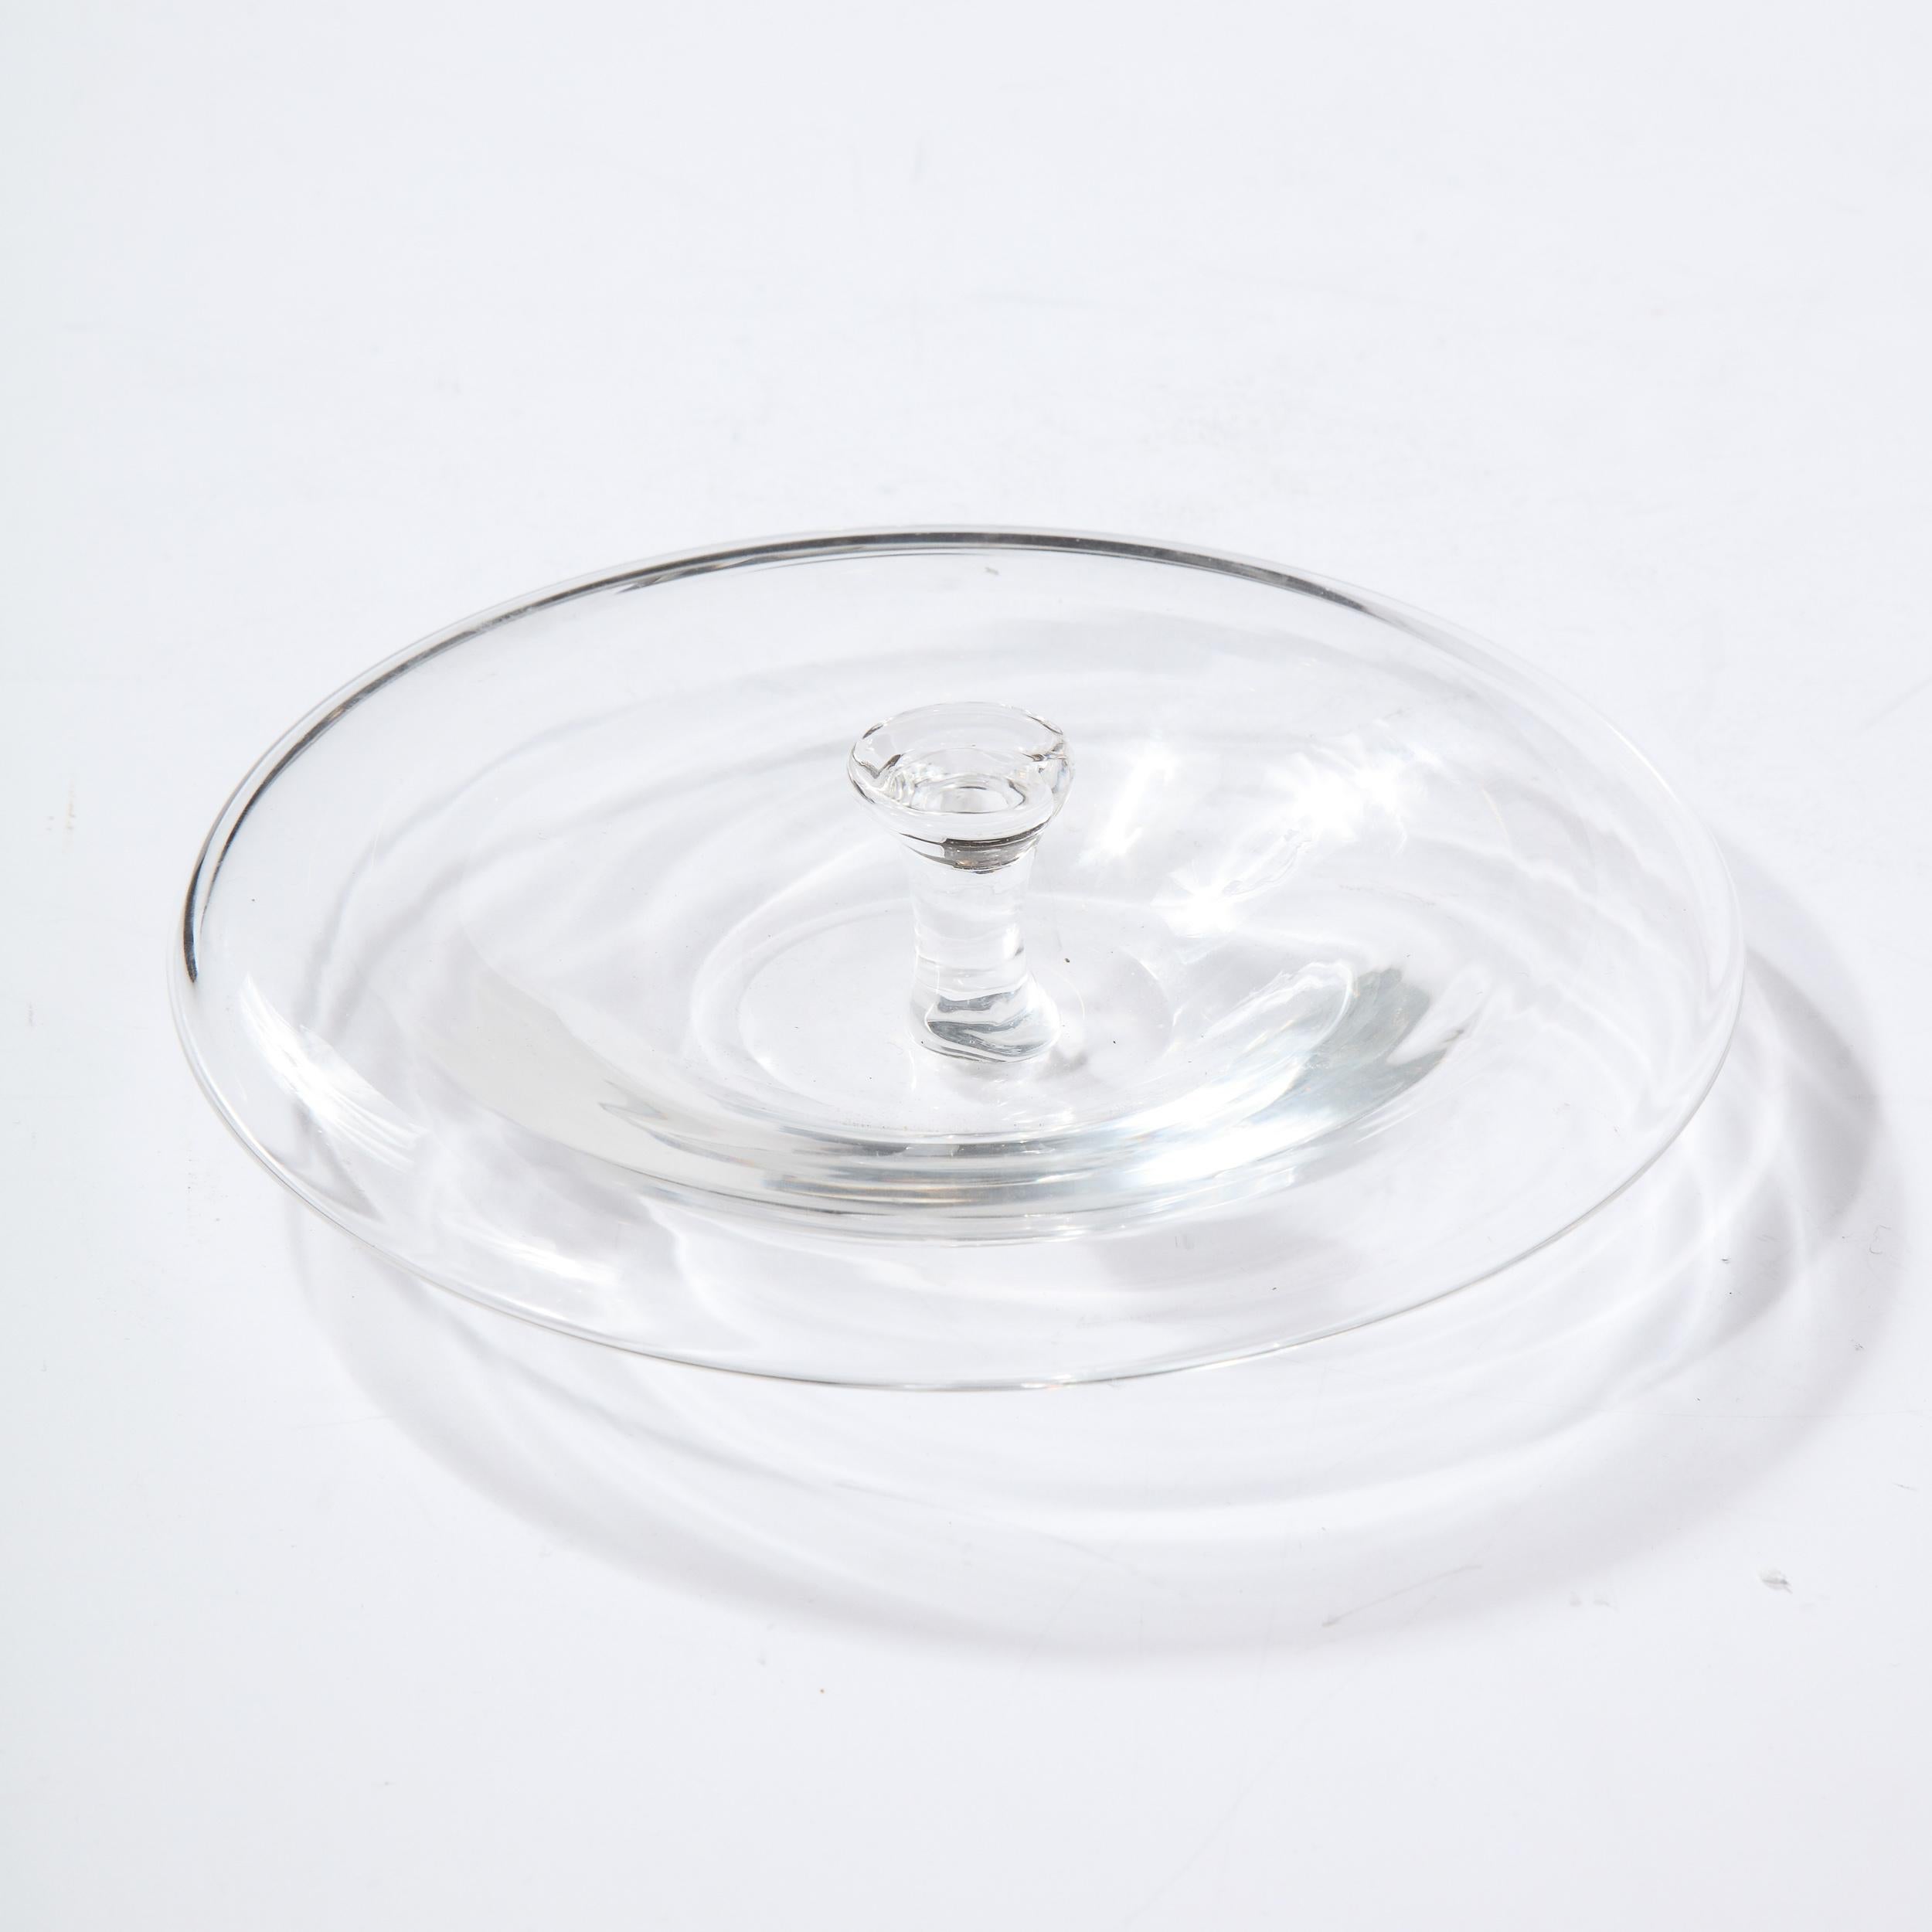 Mid-Century Modern Translucent Glass Decorative Dish by Elsa Peretti for Tiffany For Sale 2